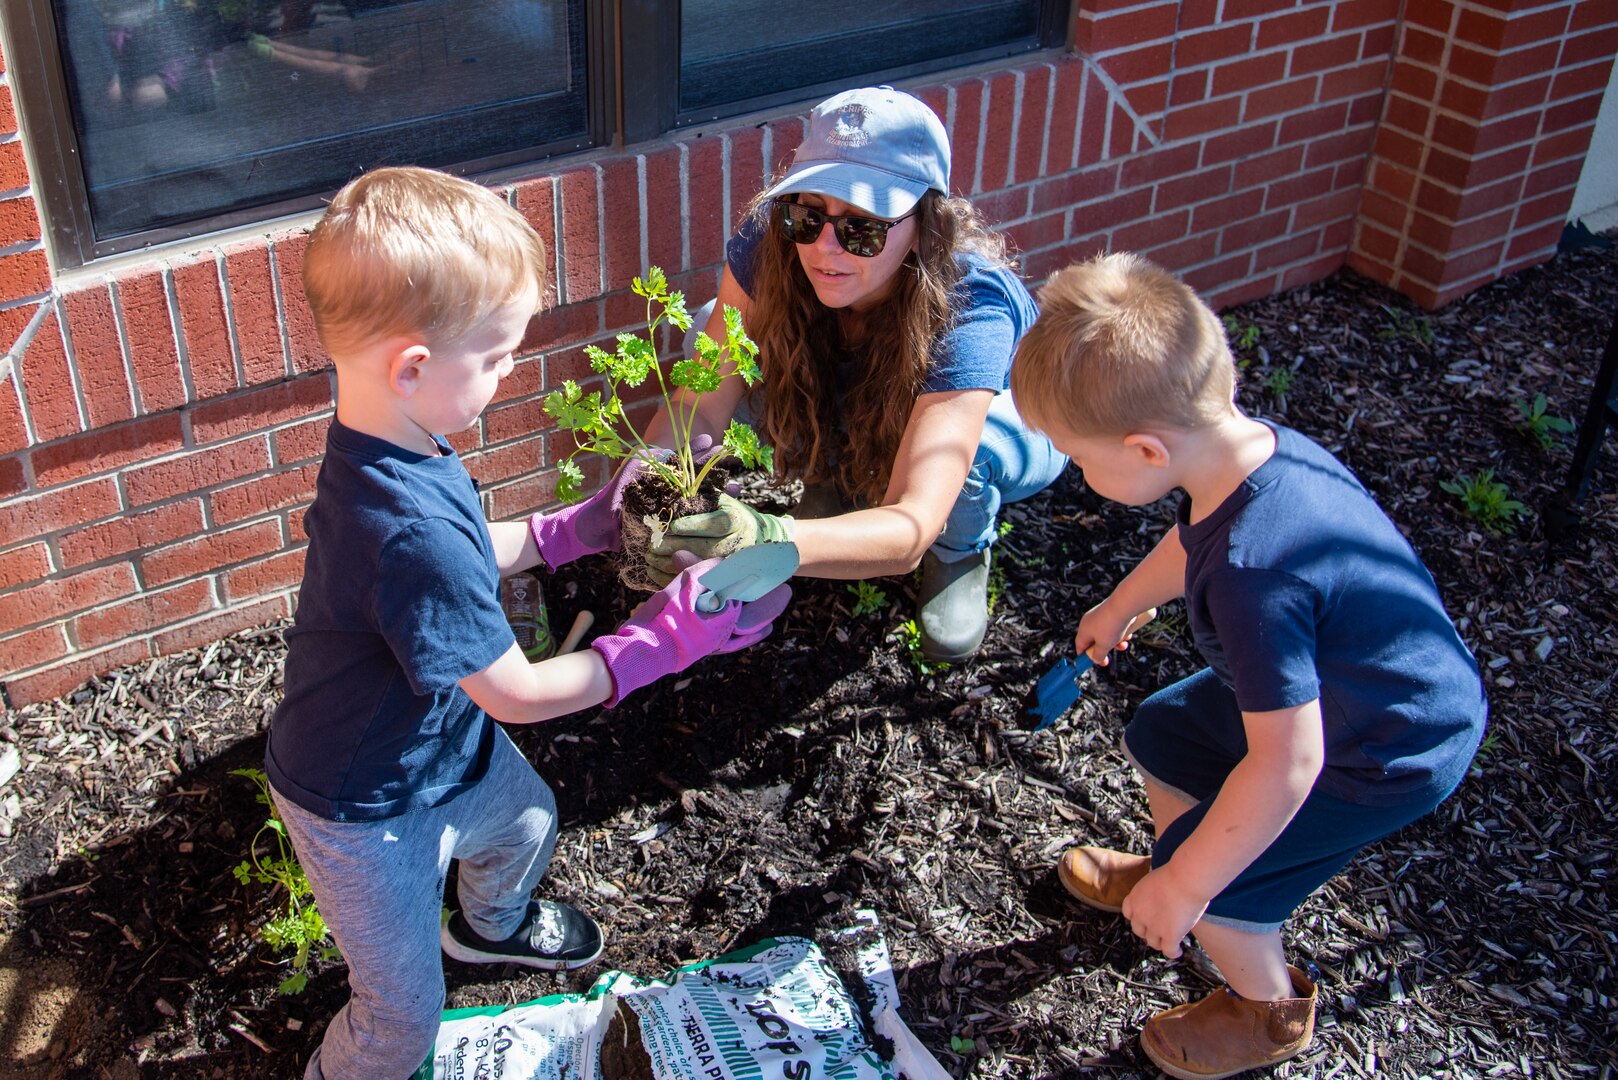 A woman in jeans, a baseball cap and sunglasses teaches children how to plant a cilantro plant in the CDC garden.